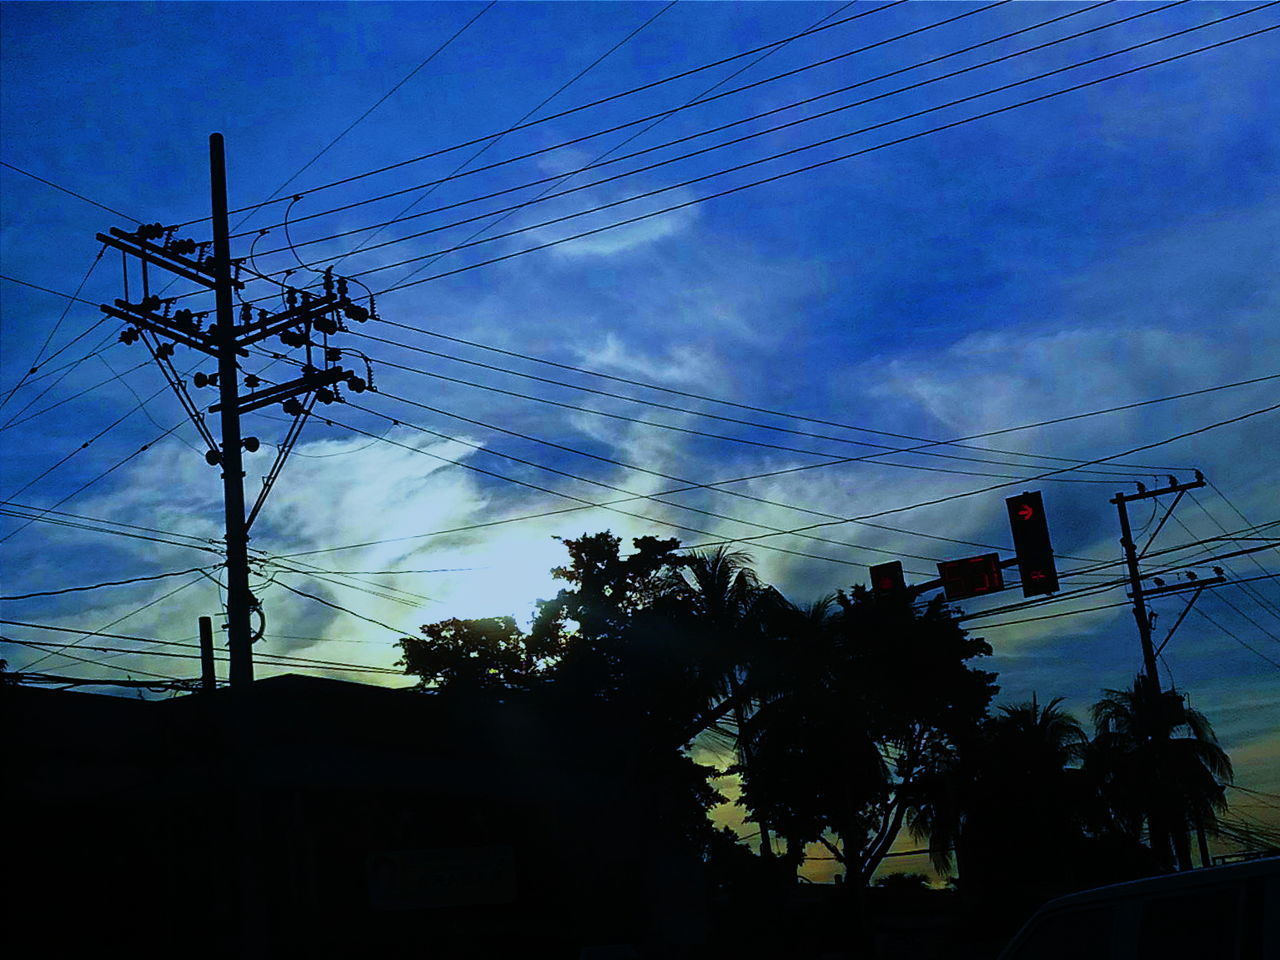 Low angle view of silhouette trees and electricity pylon against cloudy sky